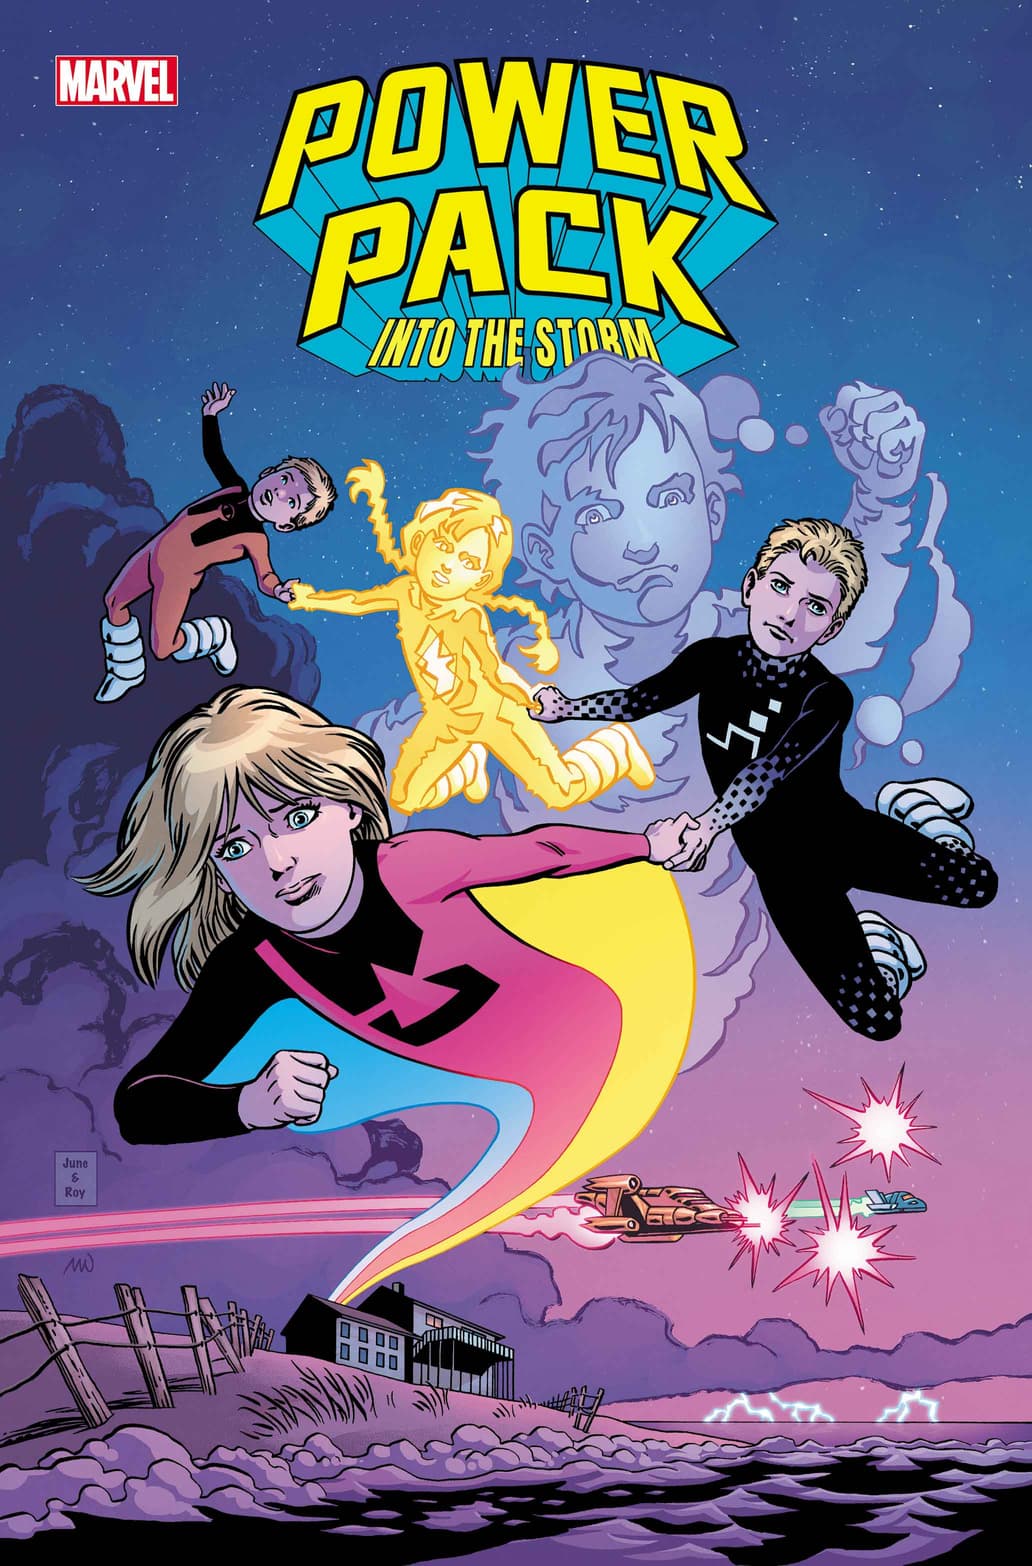 POWER PACK: INTO THE STORM #1 cover by June Brigman